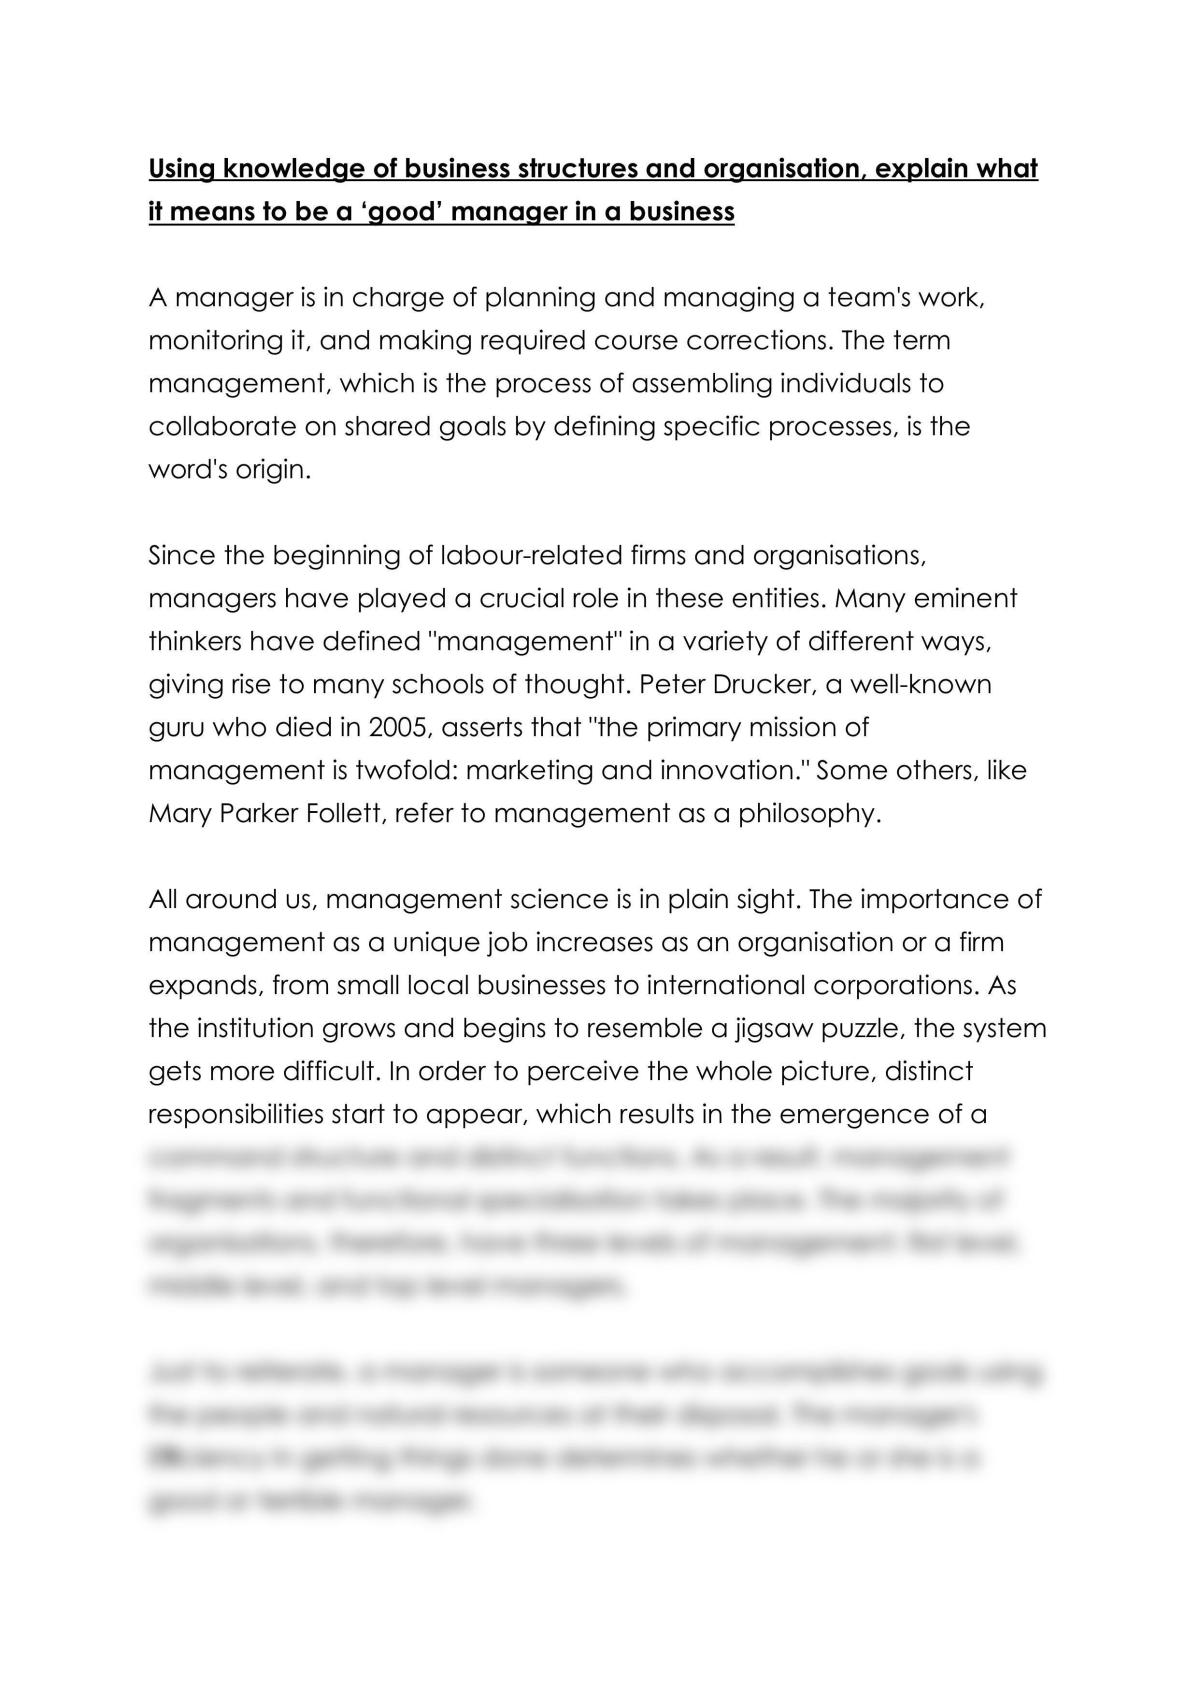 What is a Good Manager? - Page 1